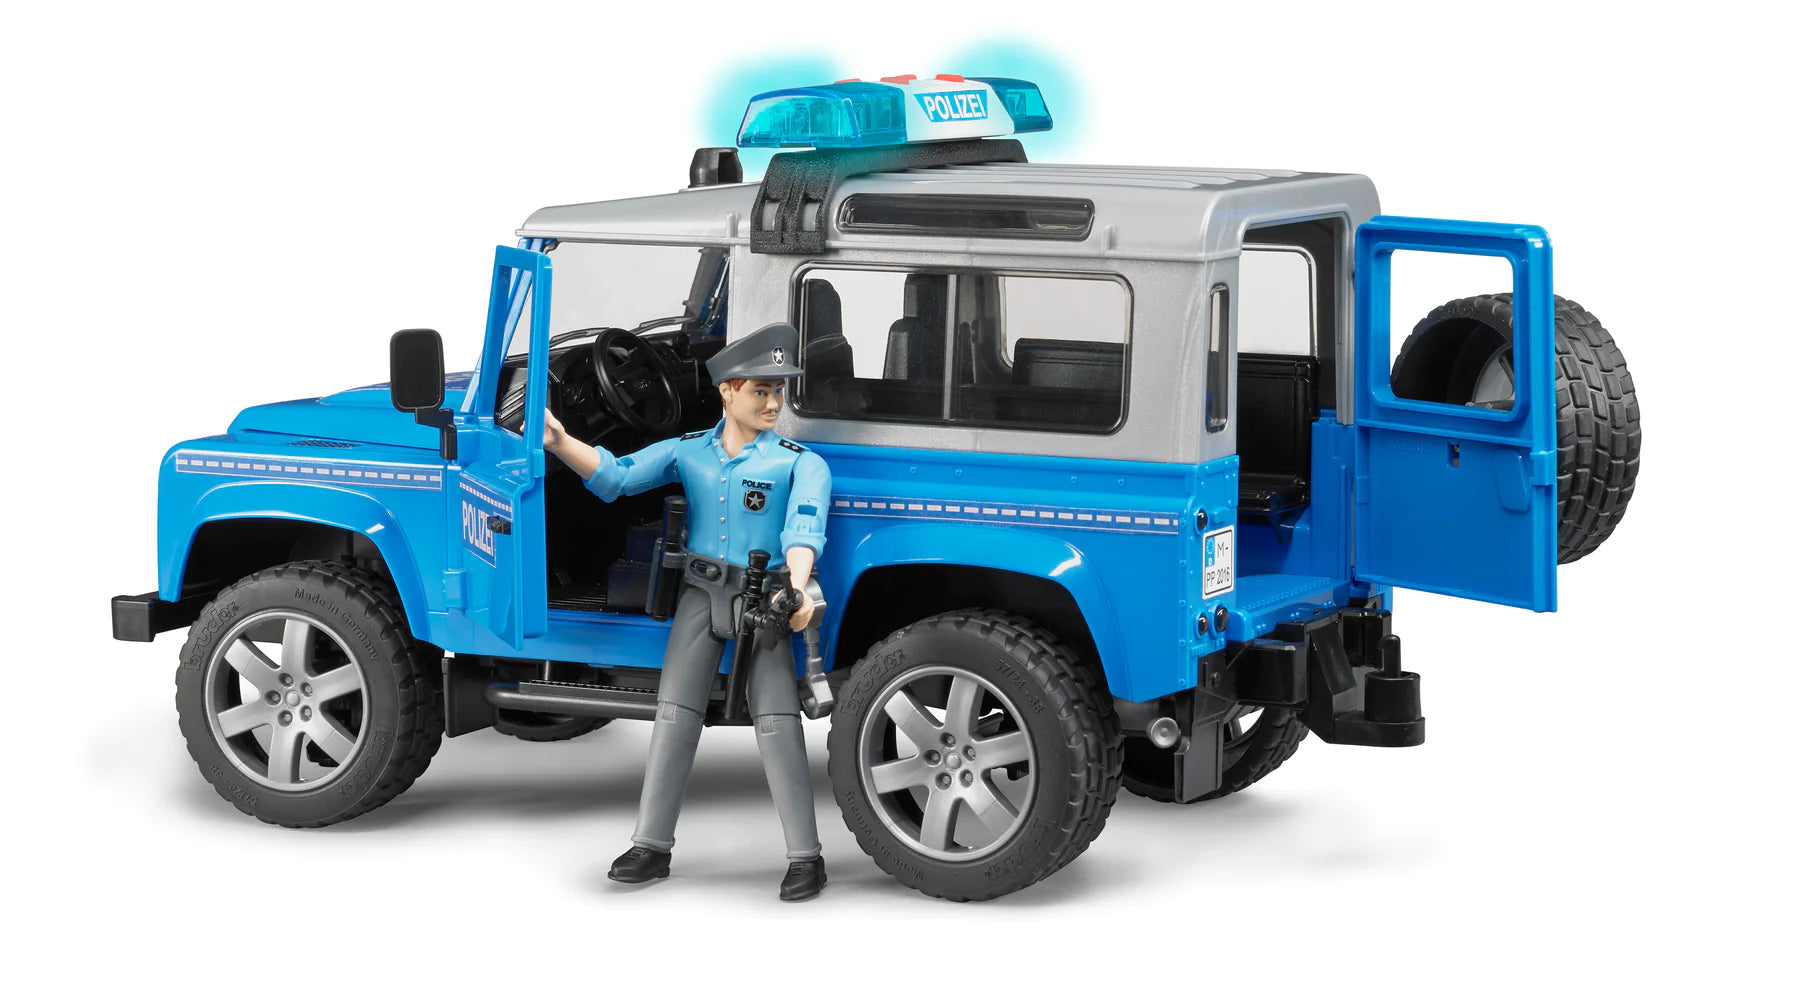 Bruder-Land Rover Police Vehicle with Policeman-02597-Legacy Toys